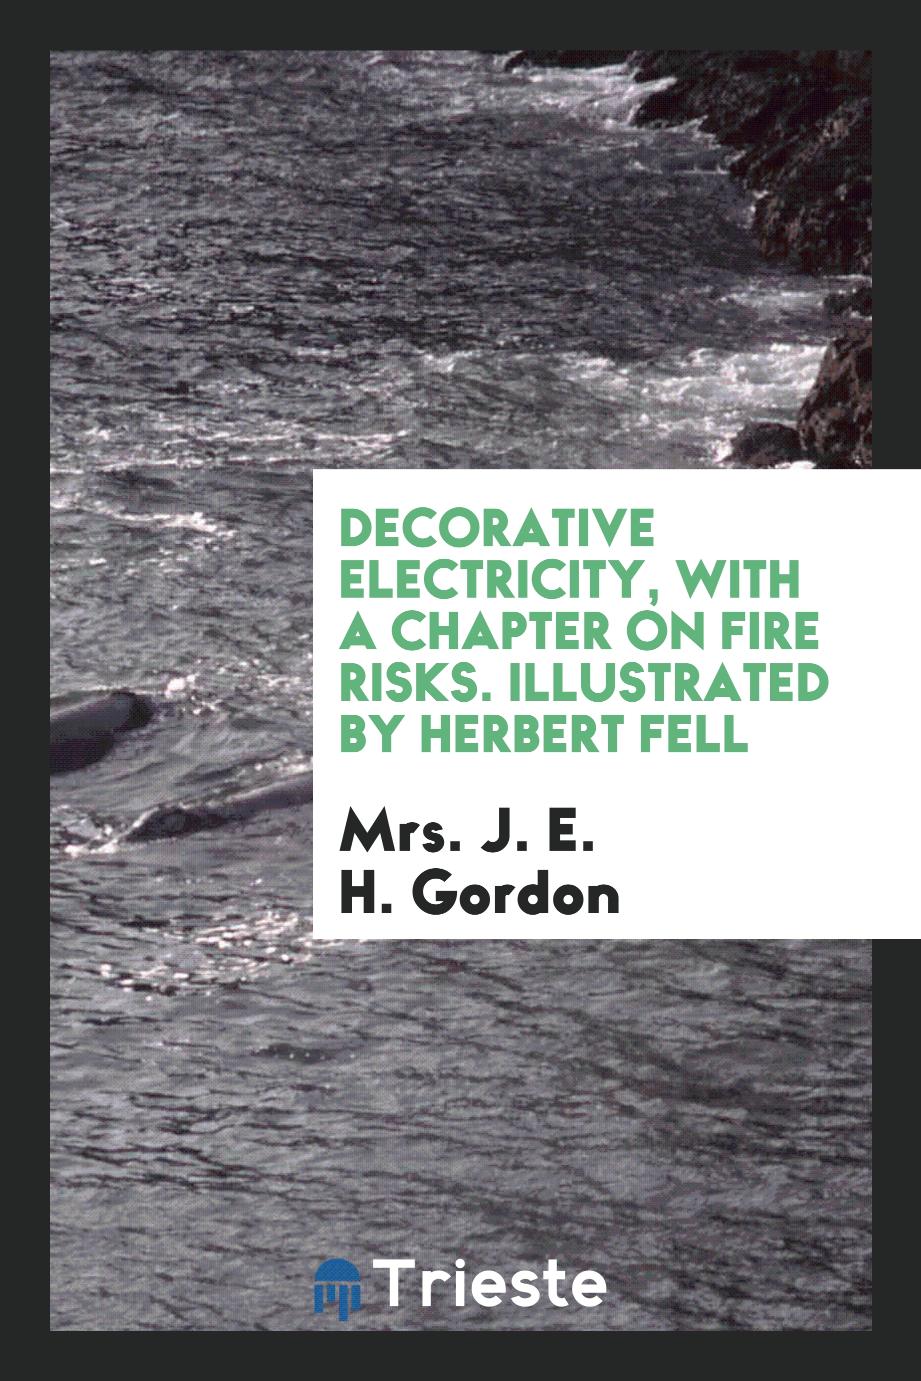 Mrs. J. E. H. Gordon - Decorative Electricity, with a Chapter on Fire Risks. Illustrated by Herbert Fell